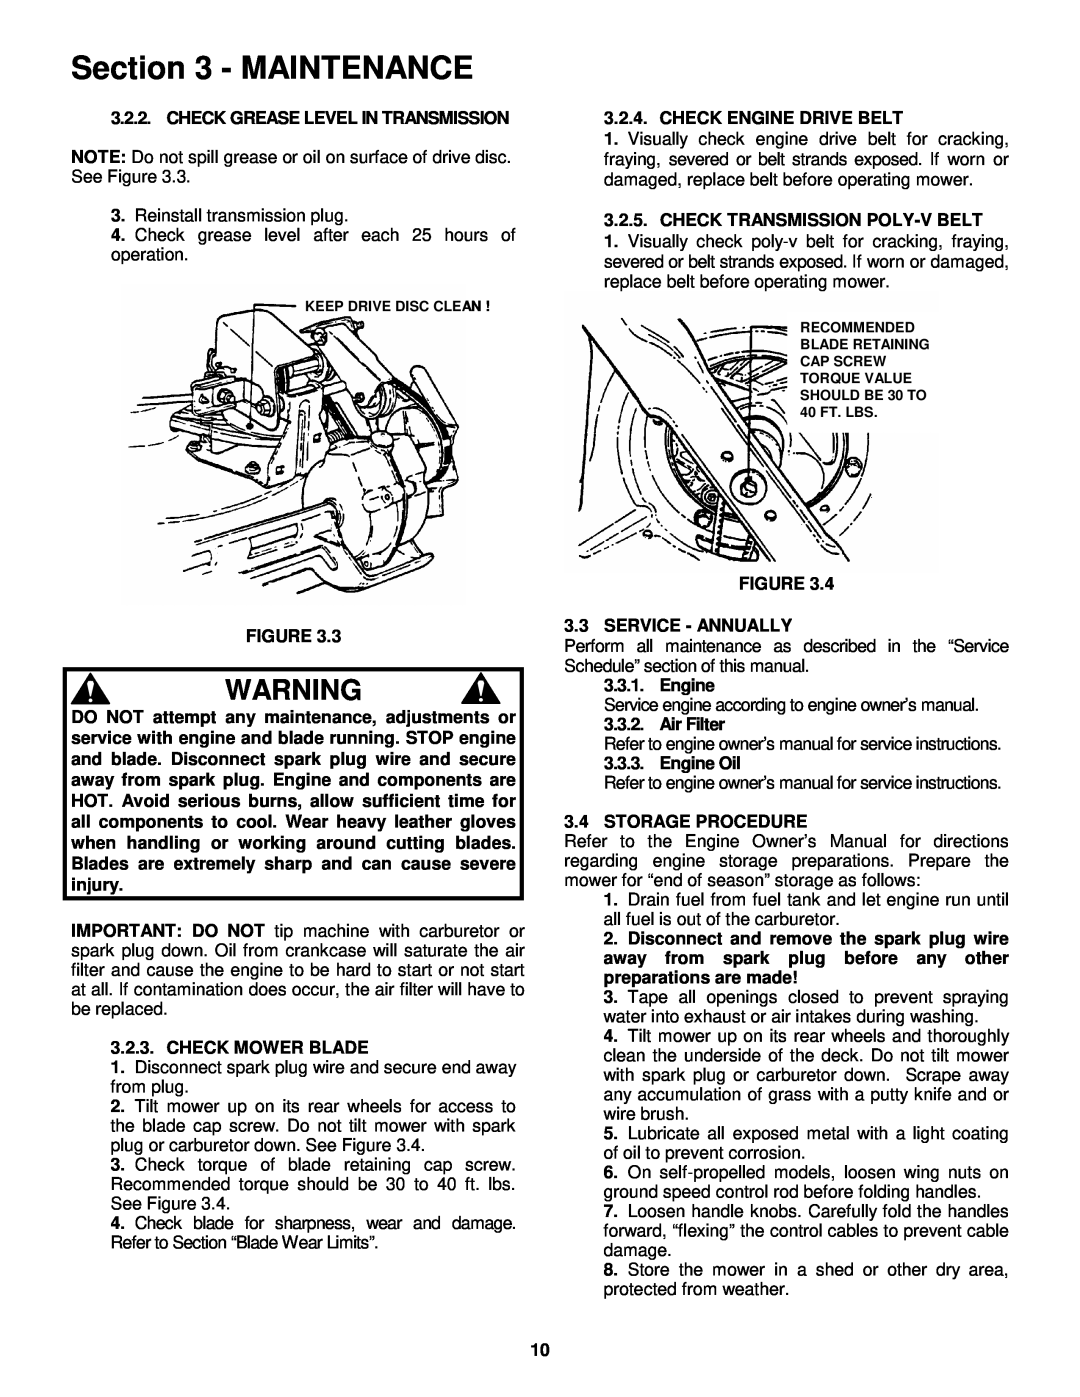 Snapper MRP216015B important safety instructions Maintenance, Check Grease Level In Transmission 